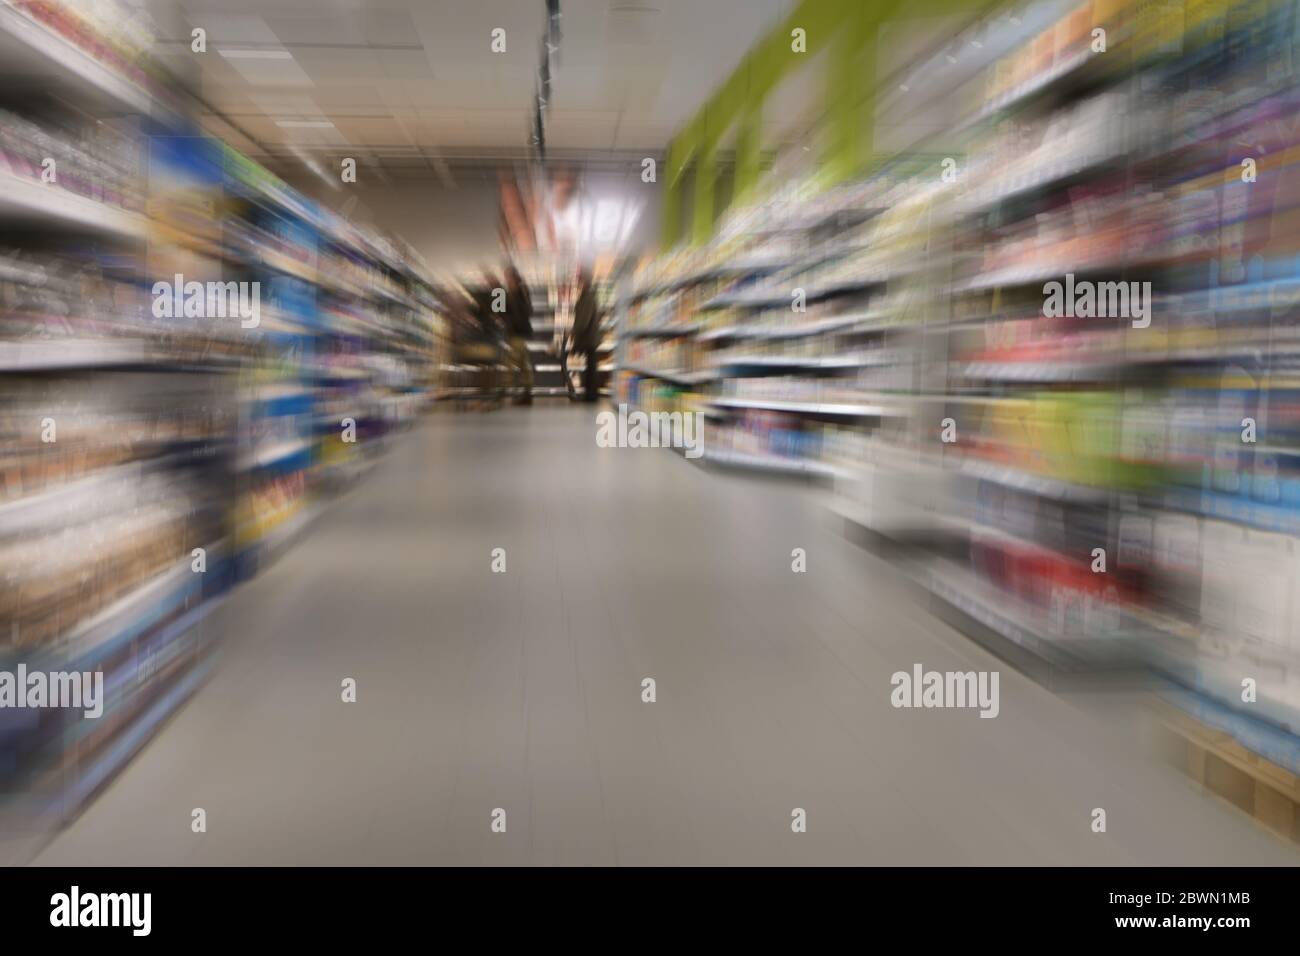 shopping in the supermarket during the coronavirus crisis curfew, few people between full shelves, zoom motion blur Stock Photo